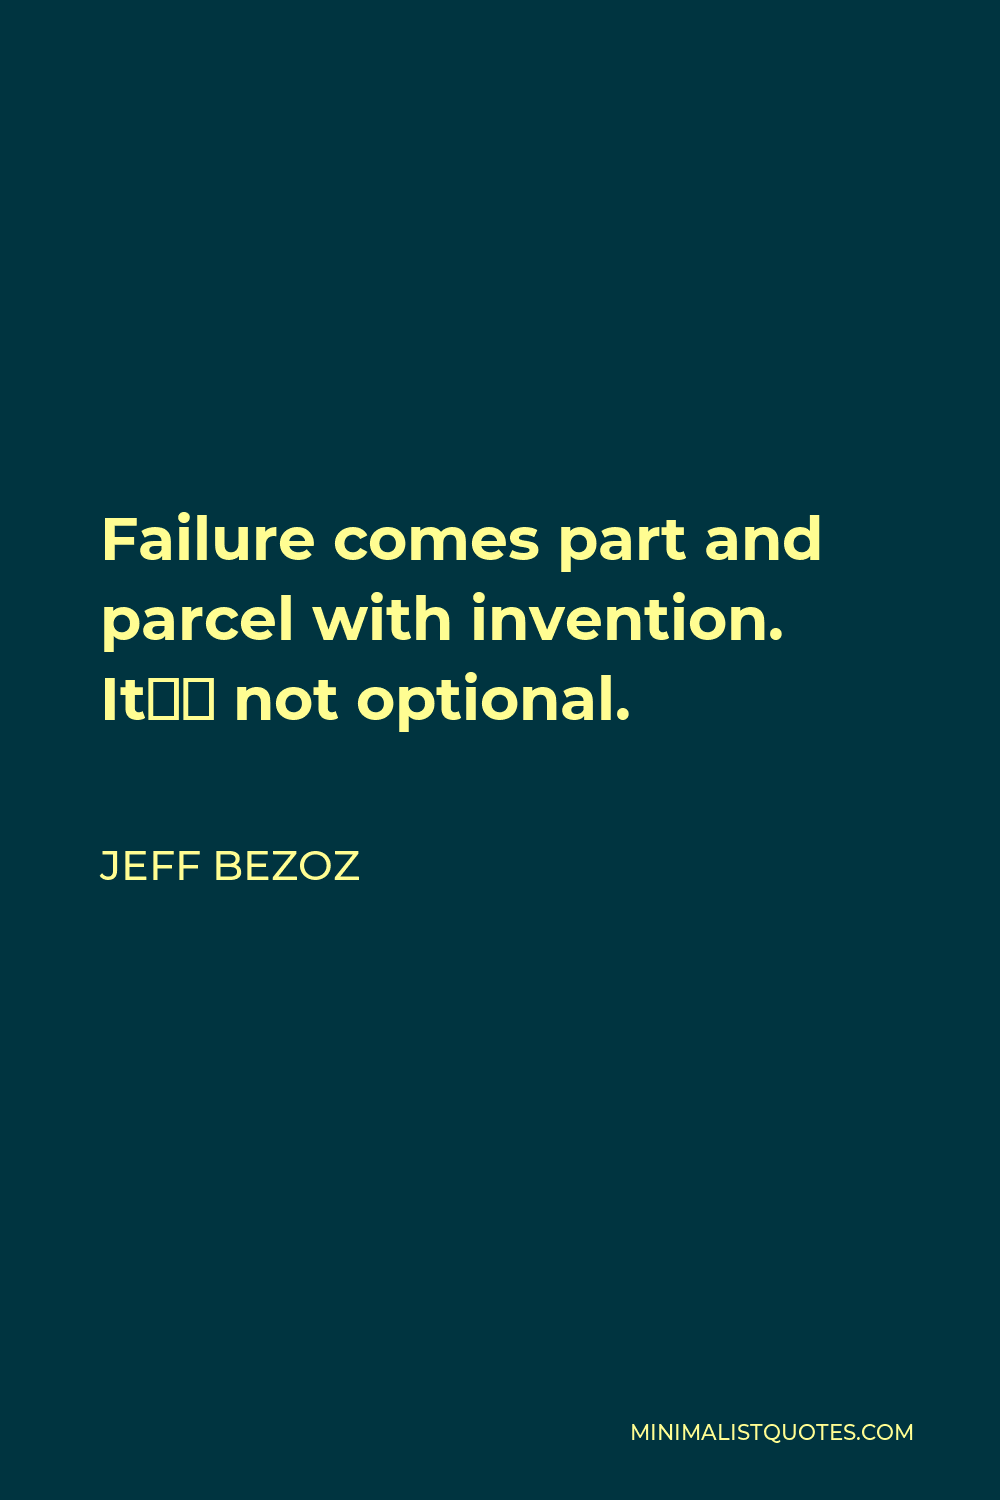 Jeff Bezoz Quote - Failure comes part and parcel with invention. It’s not optional.